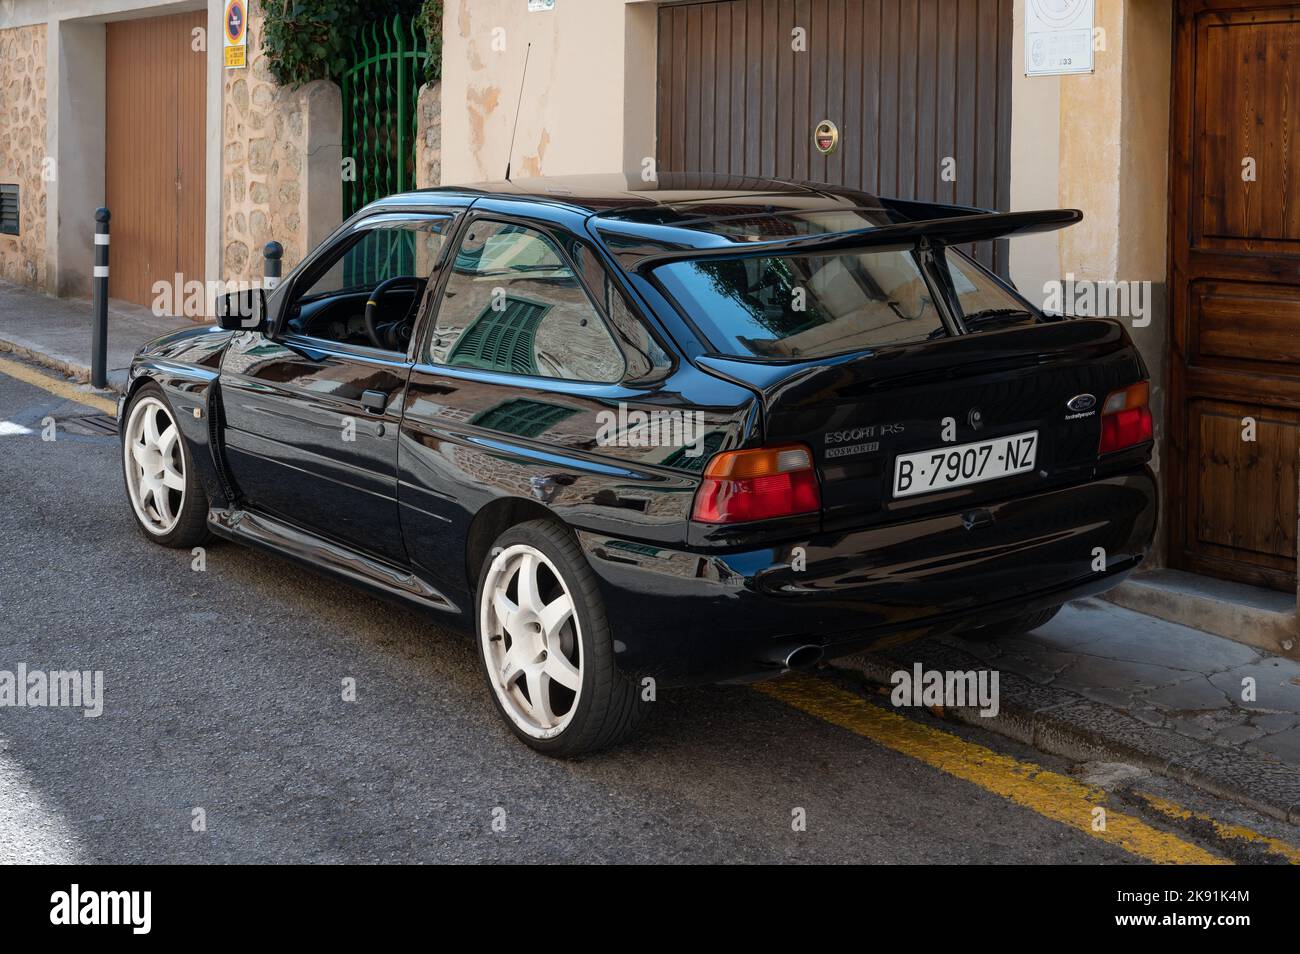 A vintage black Ford Escort RS Cosworth MK5 rally sports car parked on the street in Soller, Spain Stock Photo